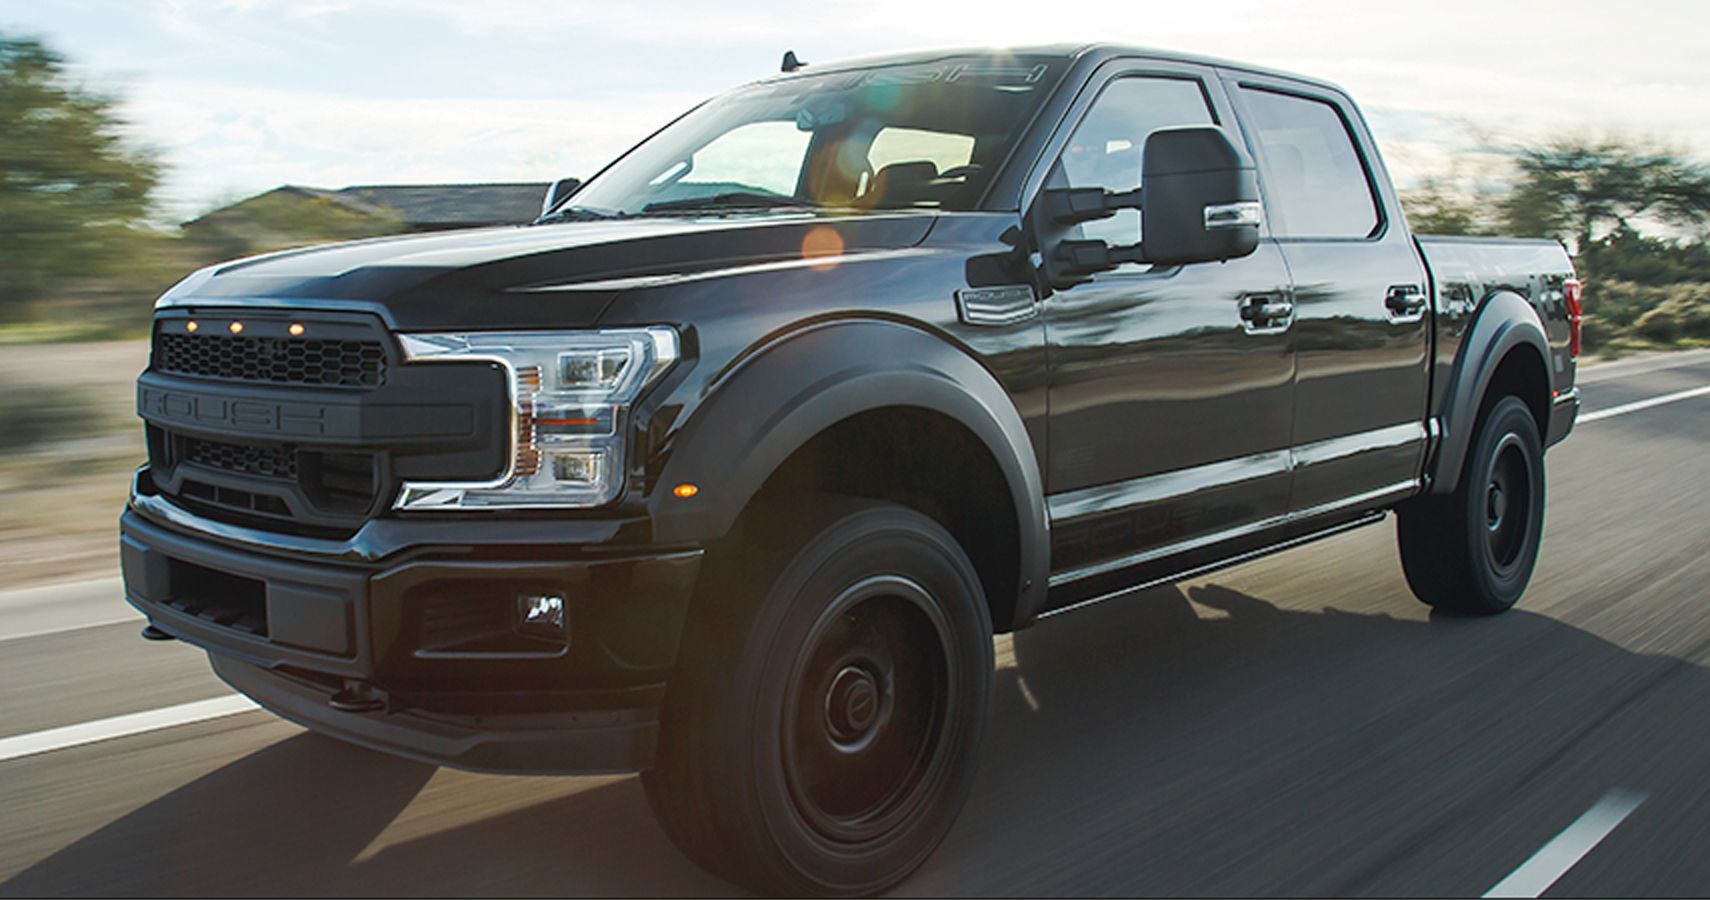 Roush Performance And 5.11 Tactical Deck Out A LimitedEdition Ford F150